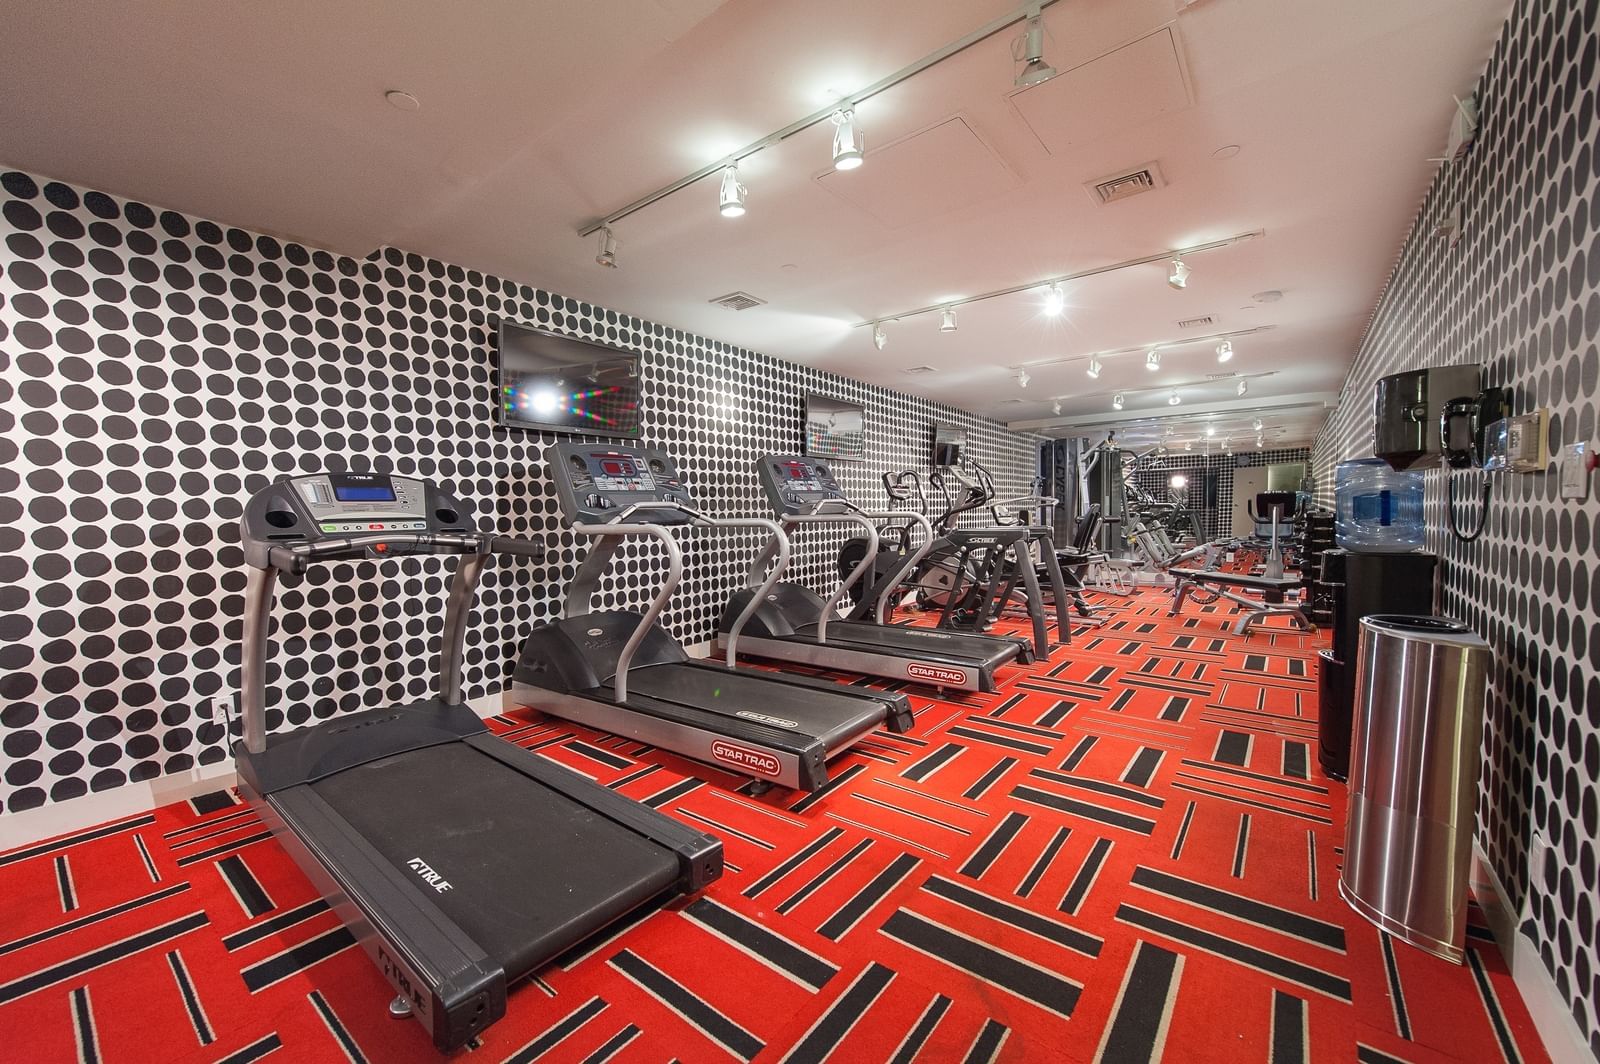 Fitness Center at the Empire Hotel